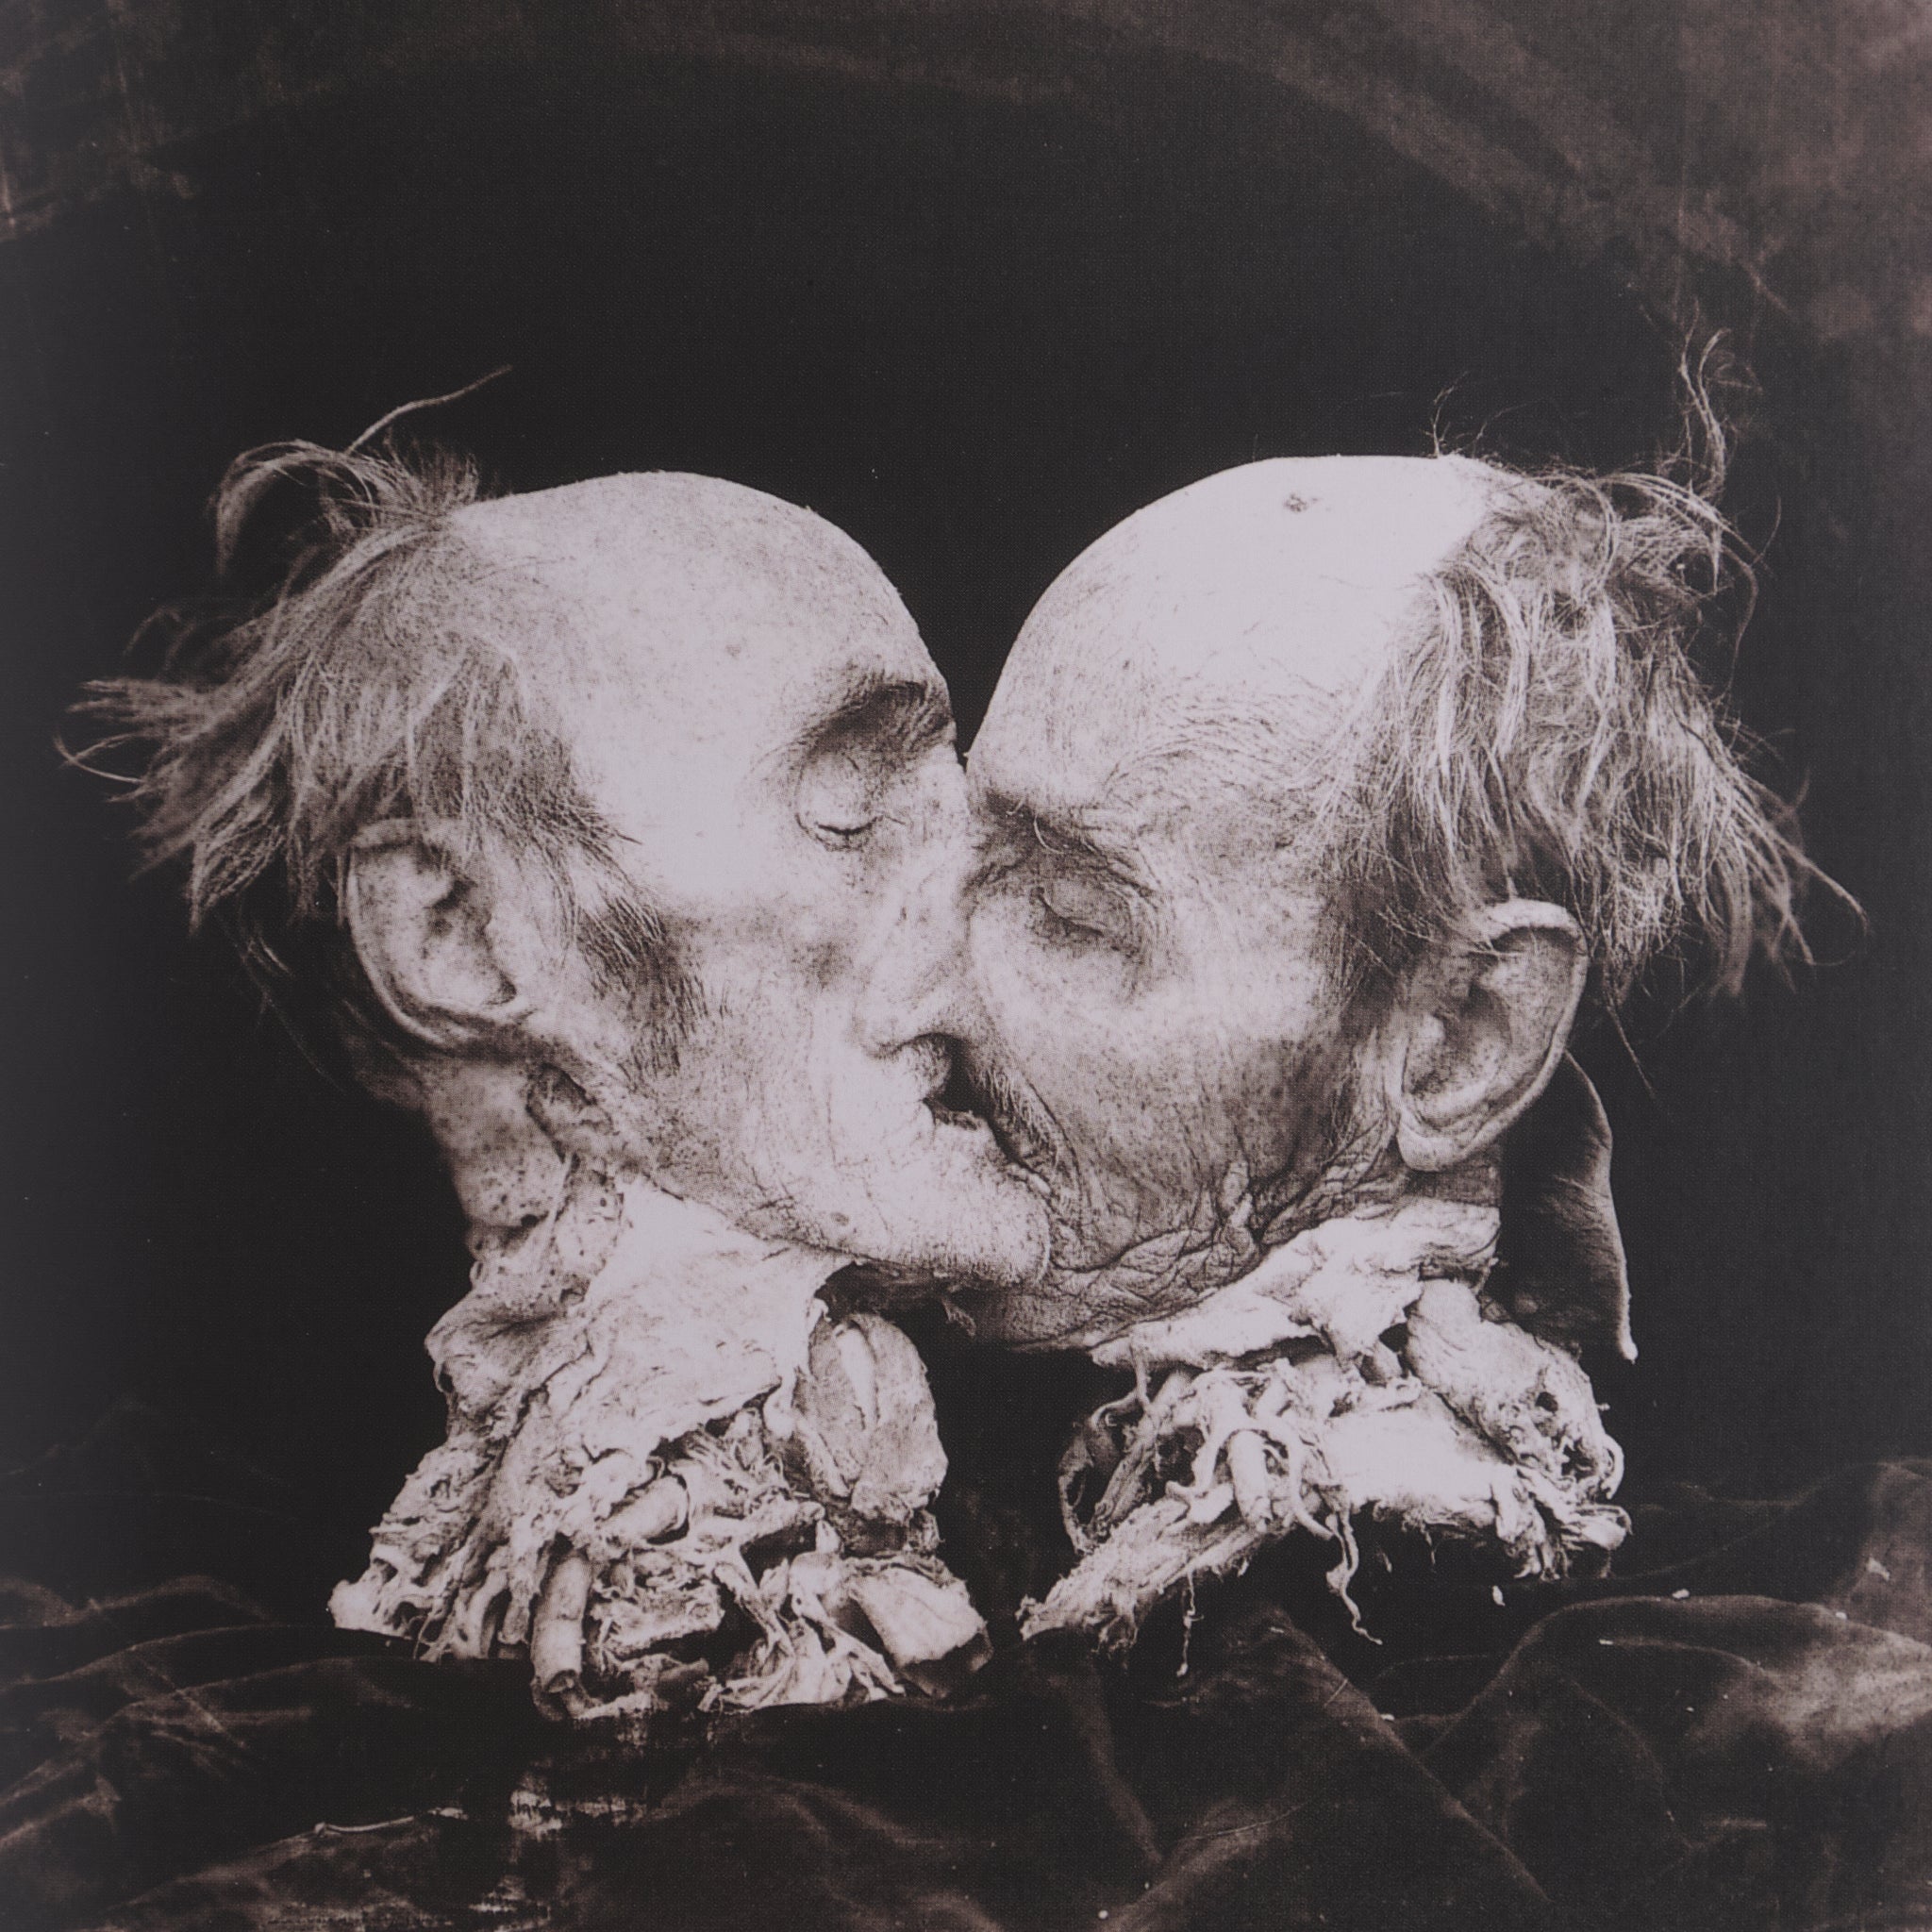 Joel-Peter Witkin — Compassionate Beauty